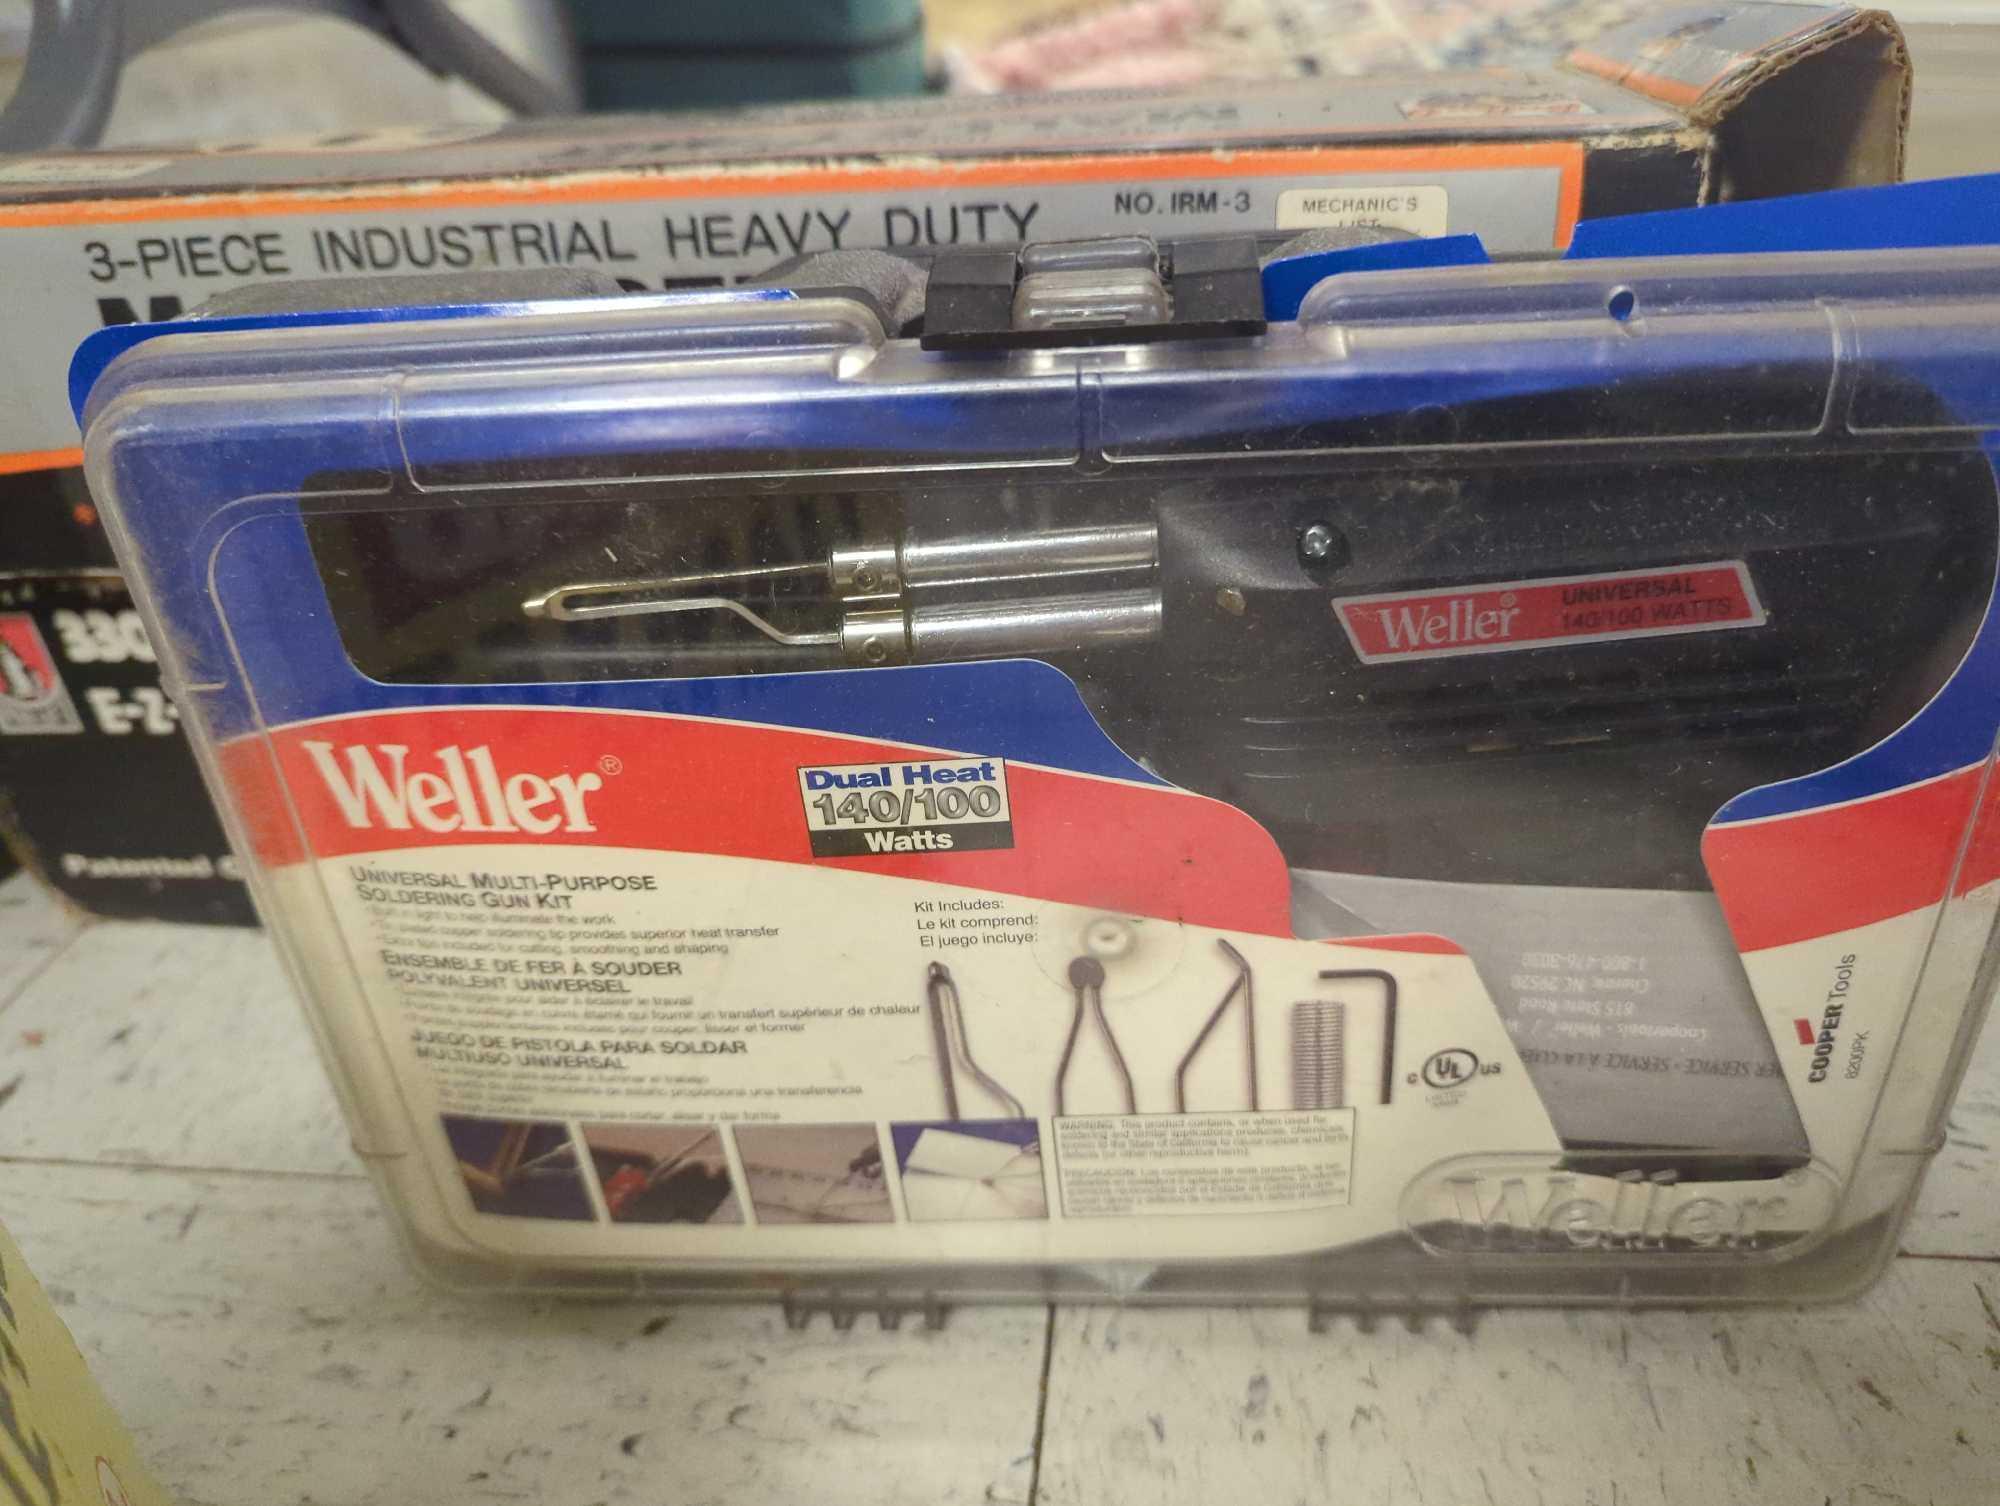 Lot of Assorted Items Including 3 Piece Industrial Heavy Duty Mallet Set, Weller Universal